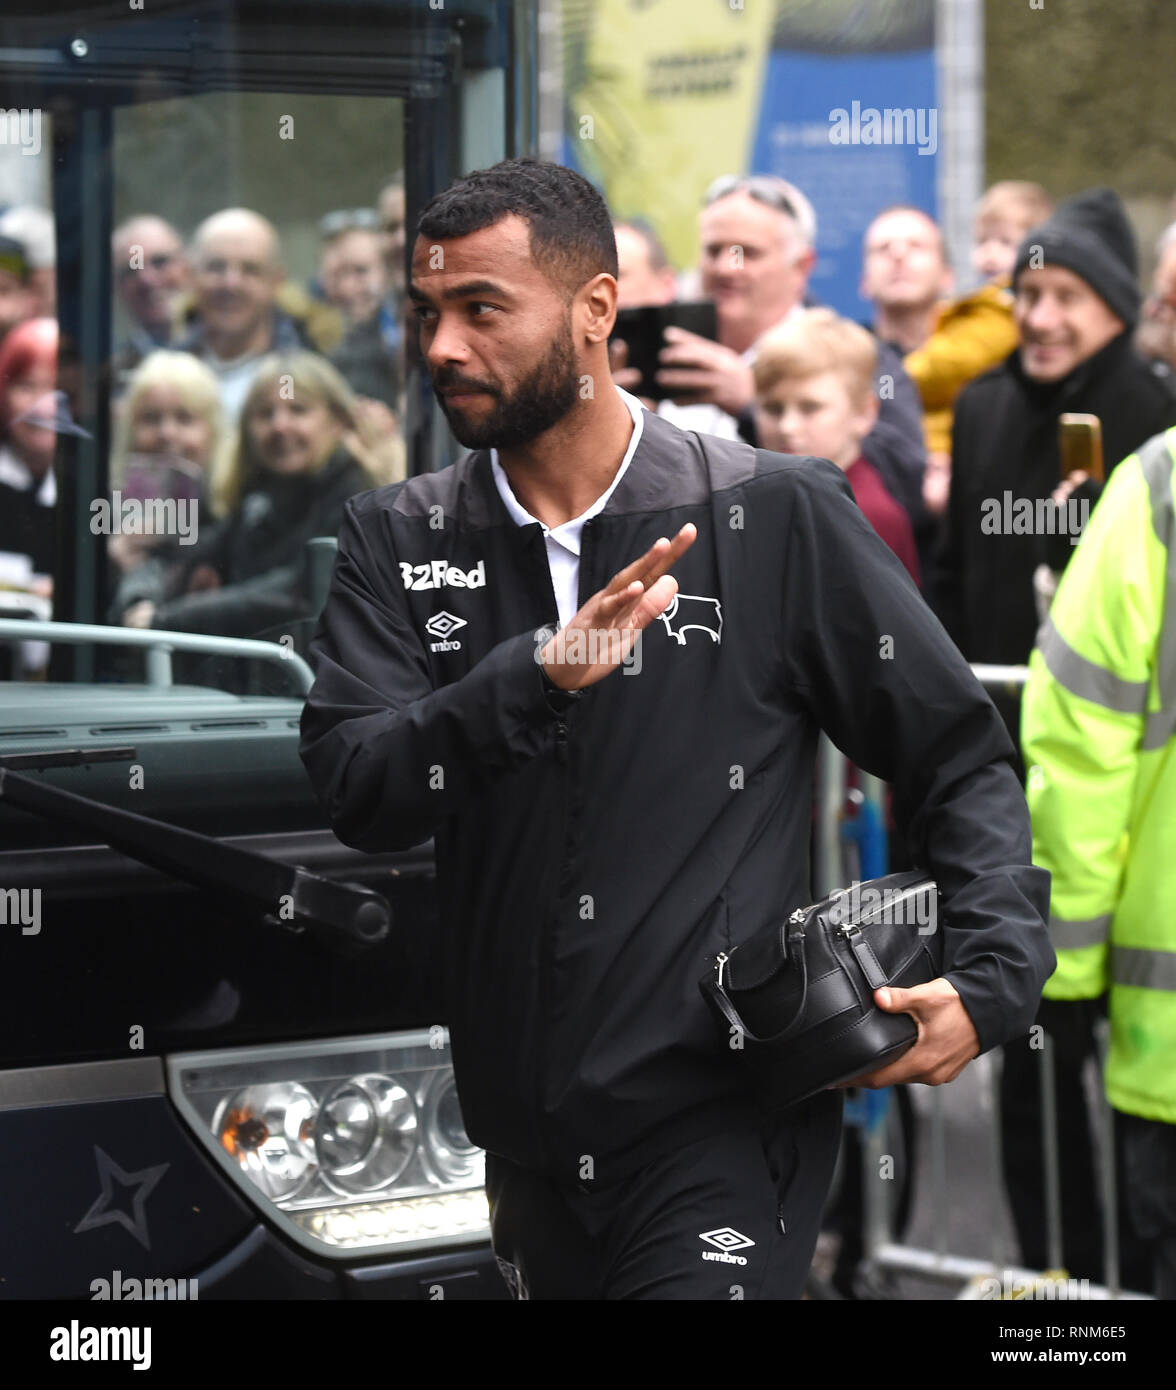 Ashley Cole of Derby arrives for the FA Cup 5th round match between Brighton & Hove Albion and Derby County at the American Express Community Stadium . 16 February 2019 Editorial use only. No merchandising. For Football images FA and Premier League restrictions apply inc. no internet/mobile usage without FAPL license - for details contact Football Dataco Stock Photo